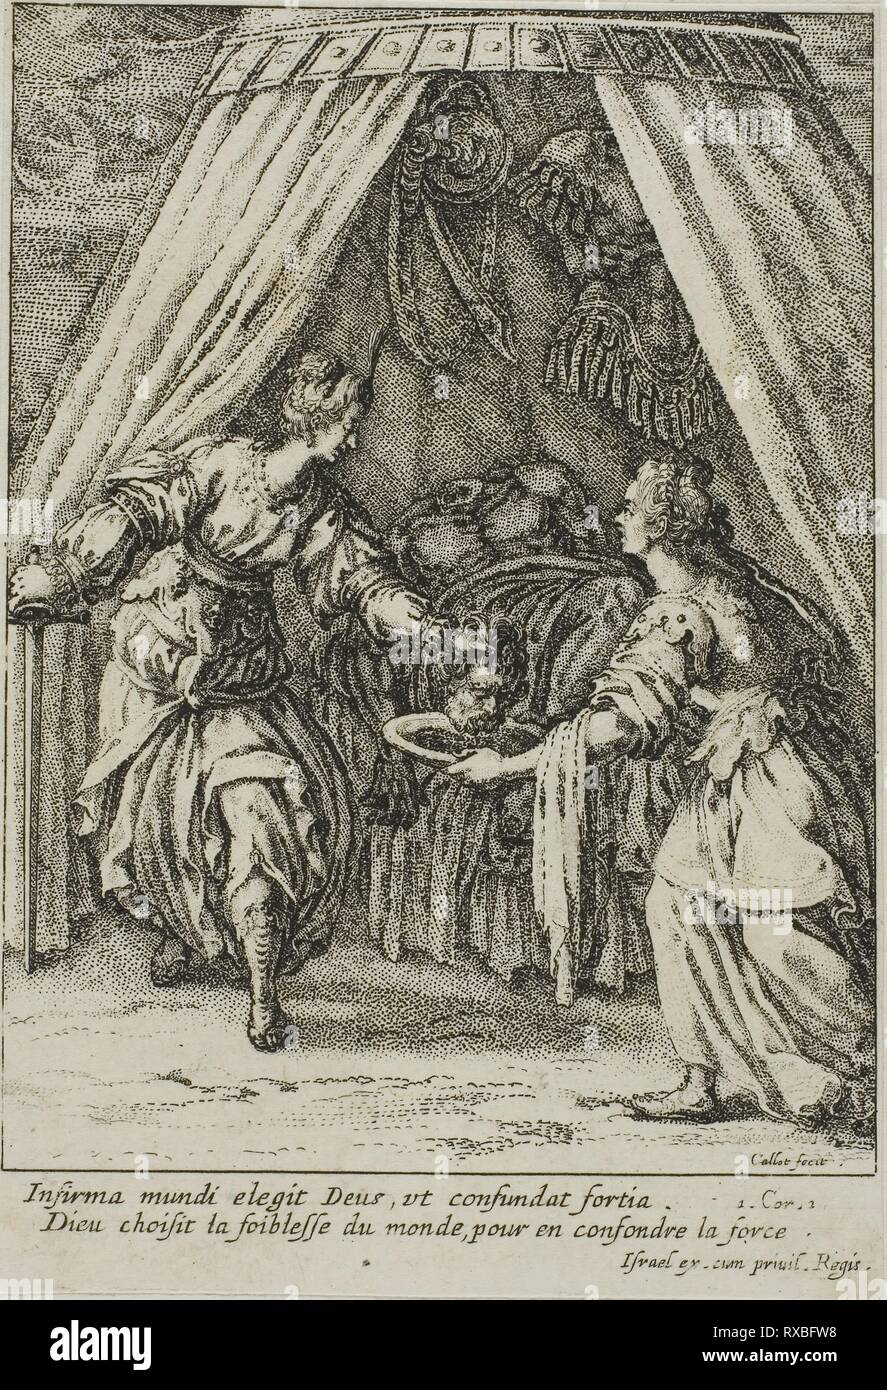 Judith with the Head of Holofernes. Jacques Callot; French, 1592-1635. Date: 1612-1635. Dimensions: 89 × 66 mm (image); 98 × 68 mm (sheet); 152 × 127 mm (secondary support). Etching on paper. Origin: France. Museum: The Chicago Art Institute. Stock Photo